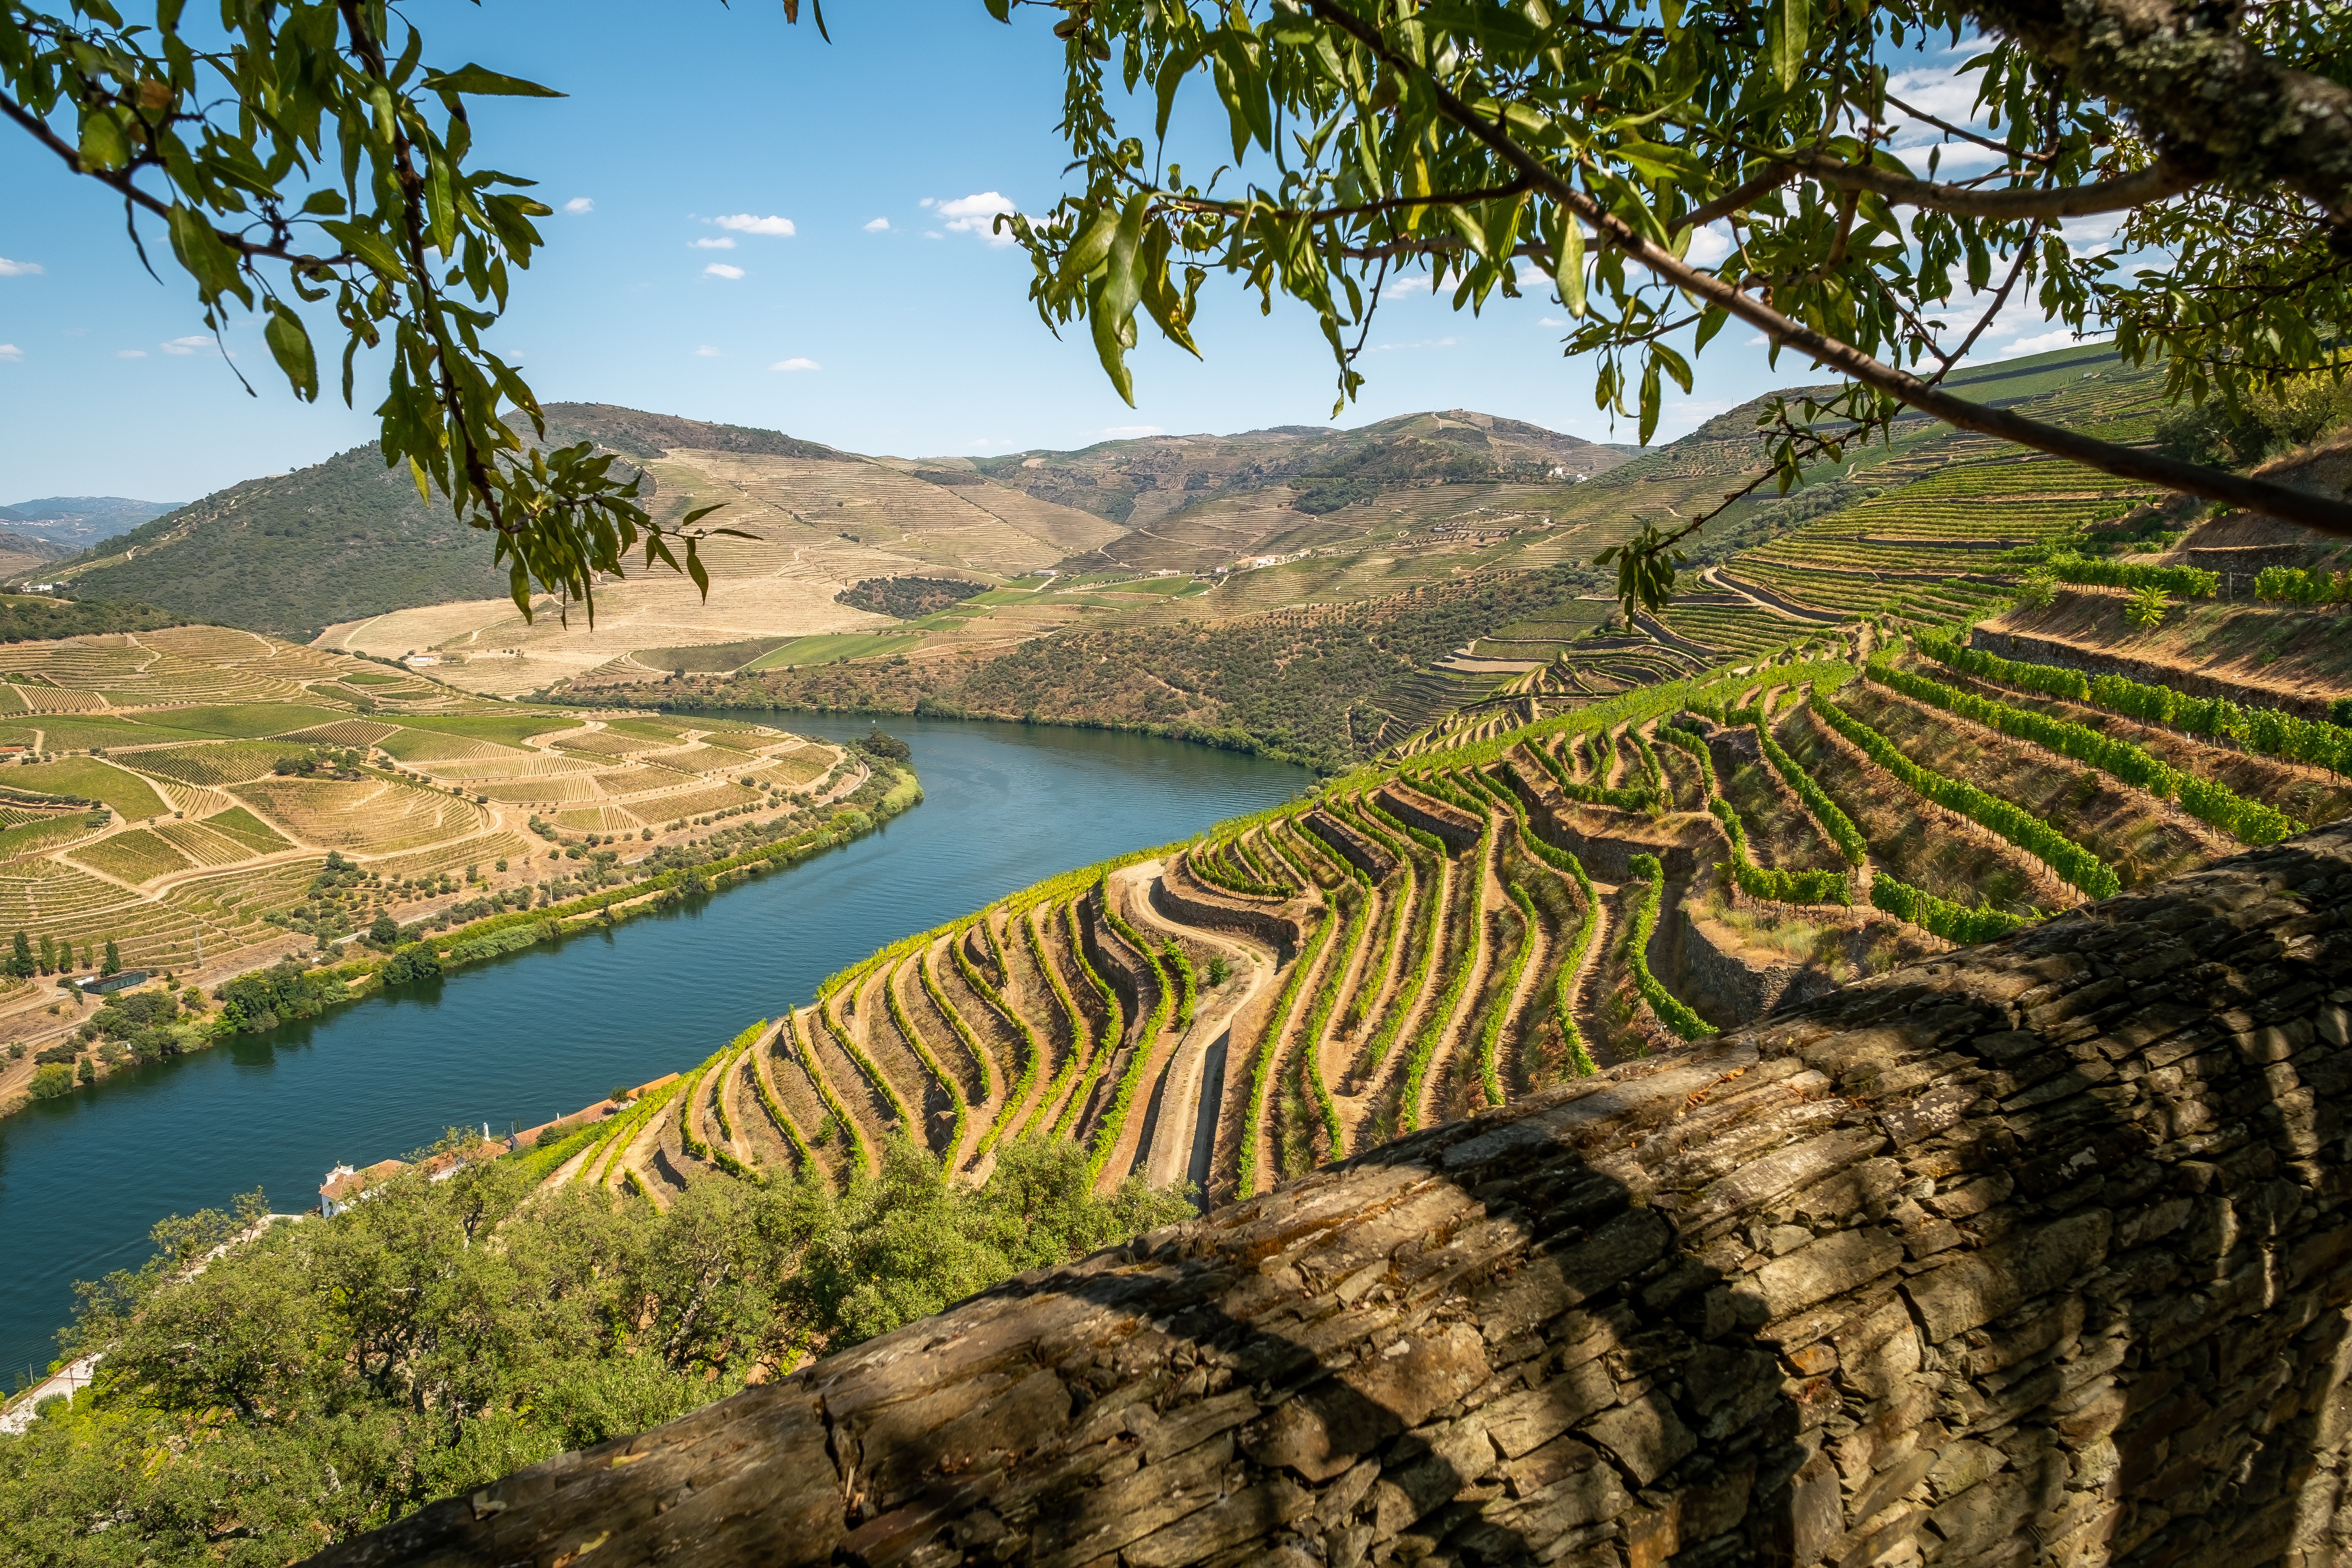 Discover this Memorable 5  day Tour in the Douro Valley